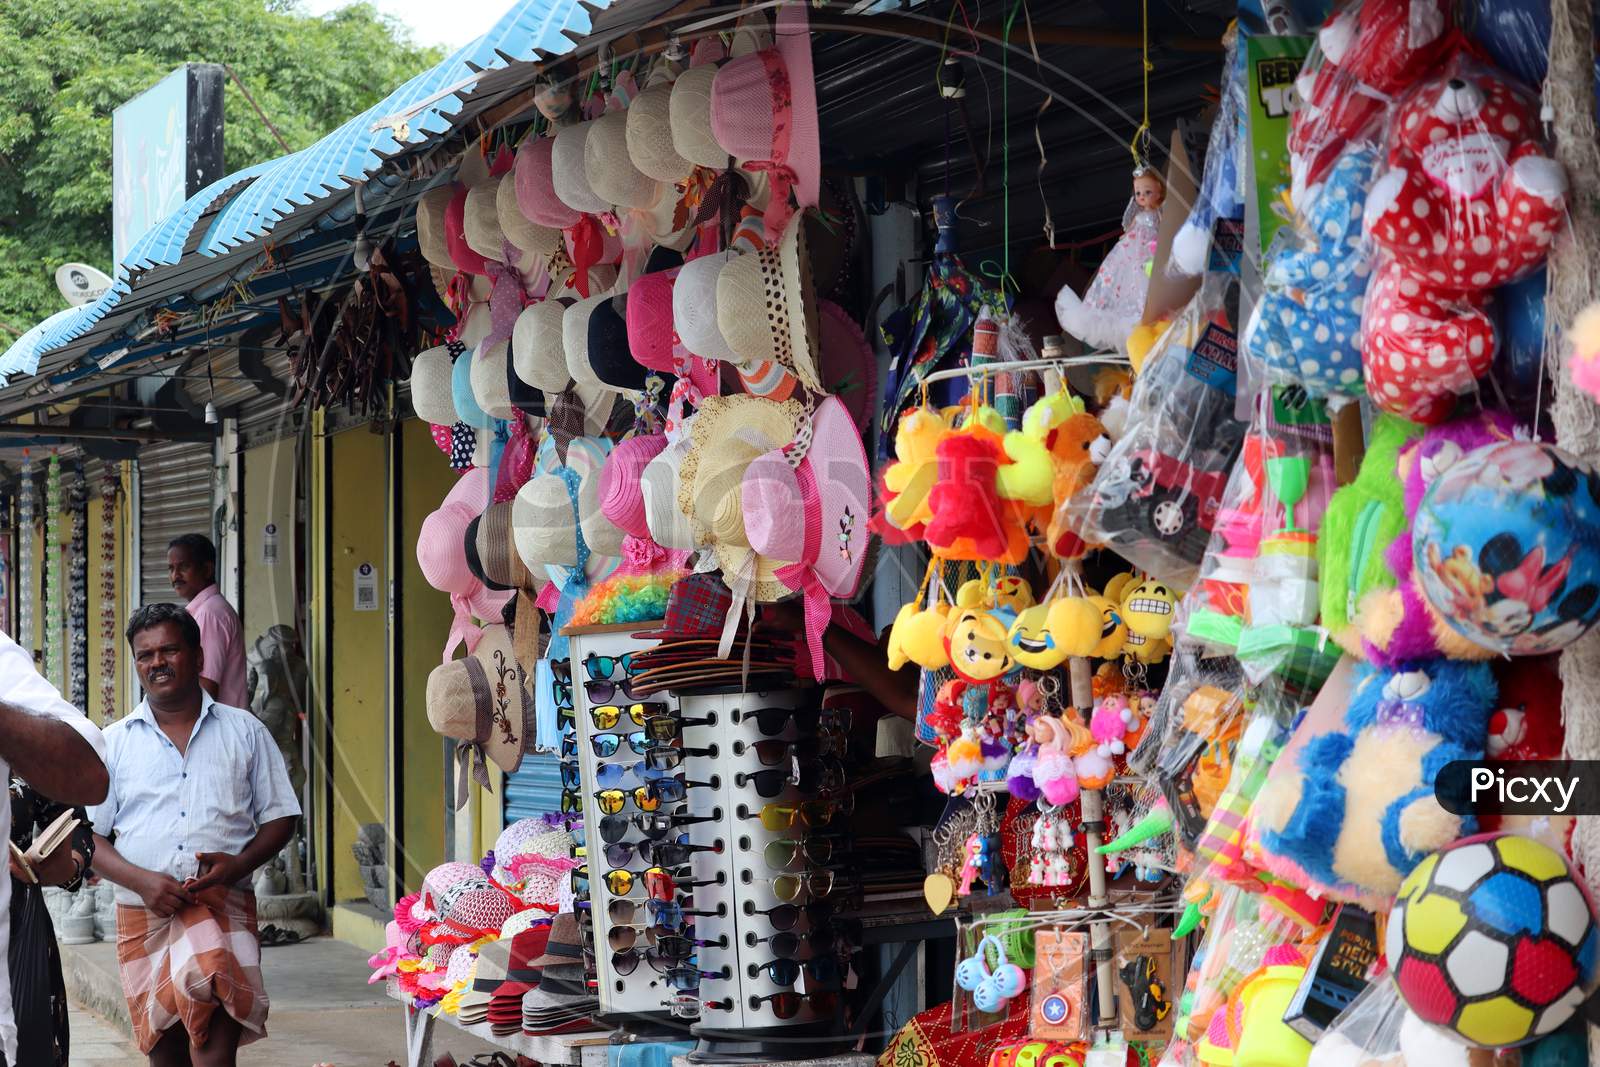 Cap Shop Opened On The Footpath In The Market To Trade The Upcoming Festivals